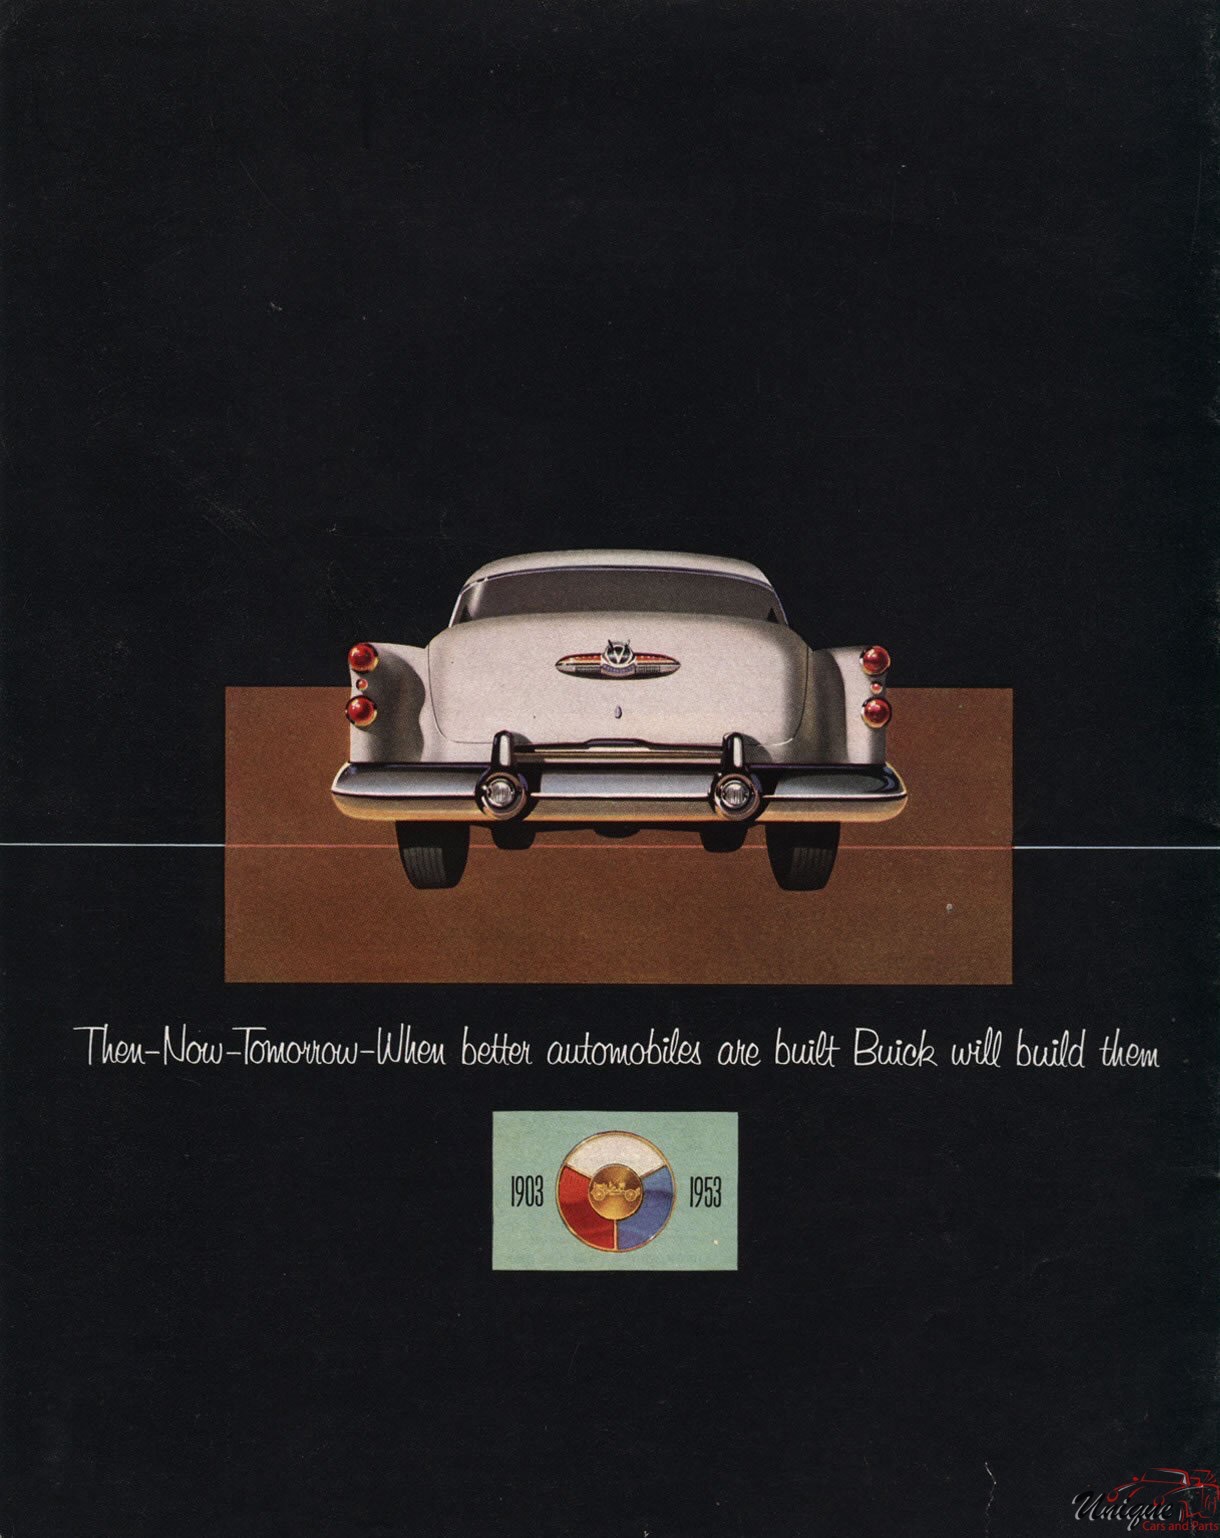 1953 Buick Brochure Page 1